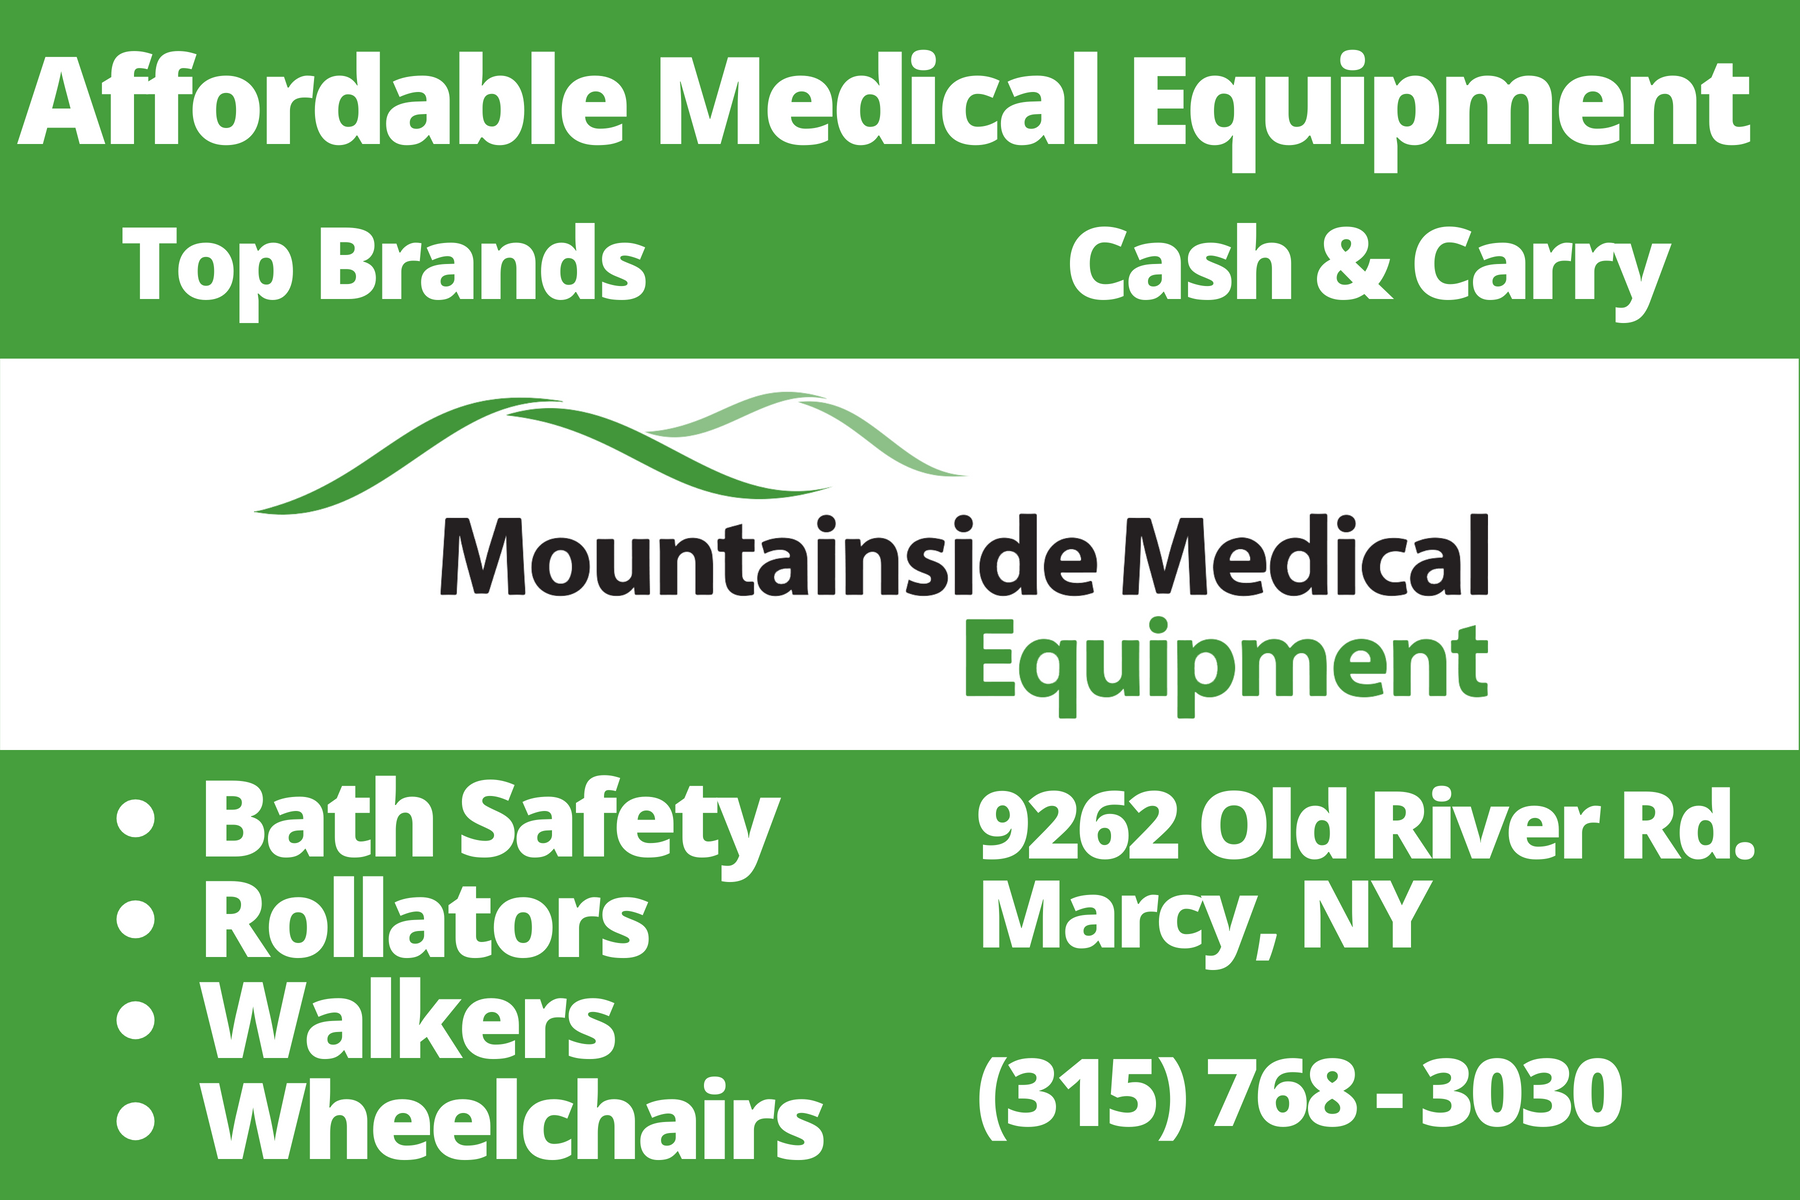 Wholesale Medical Supplies are Available at the Best Prices at Mountainside Medical Equipment